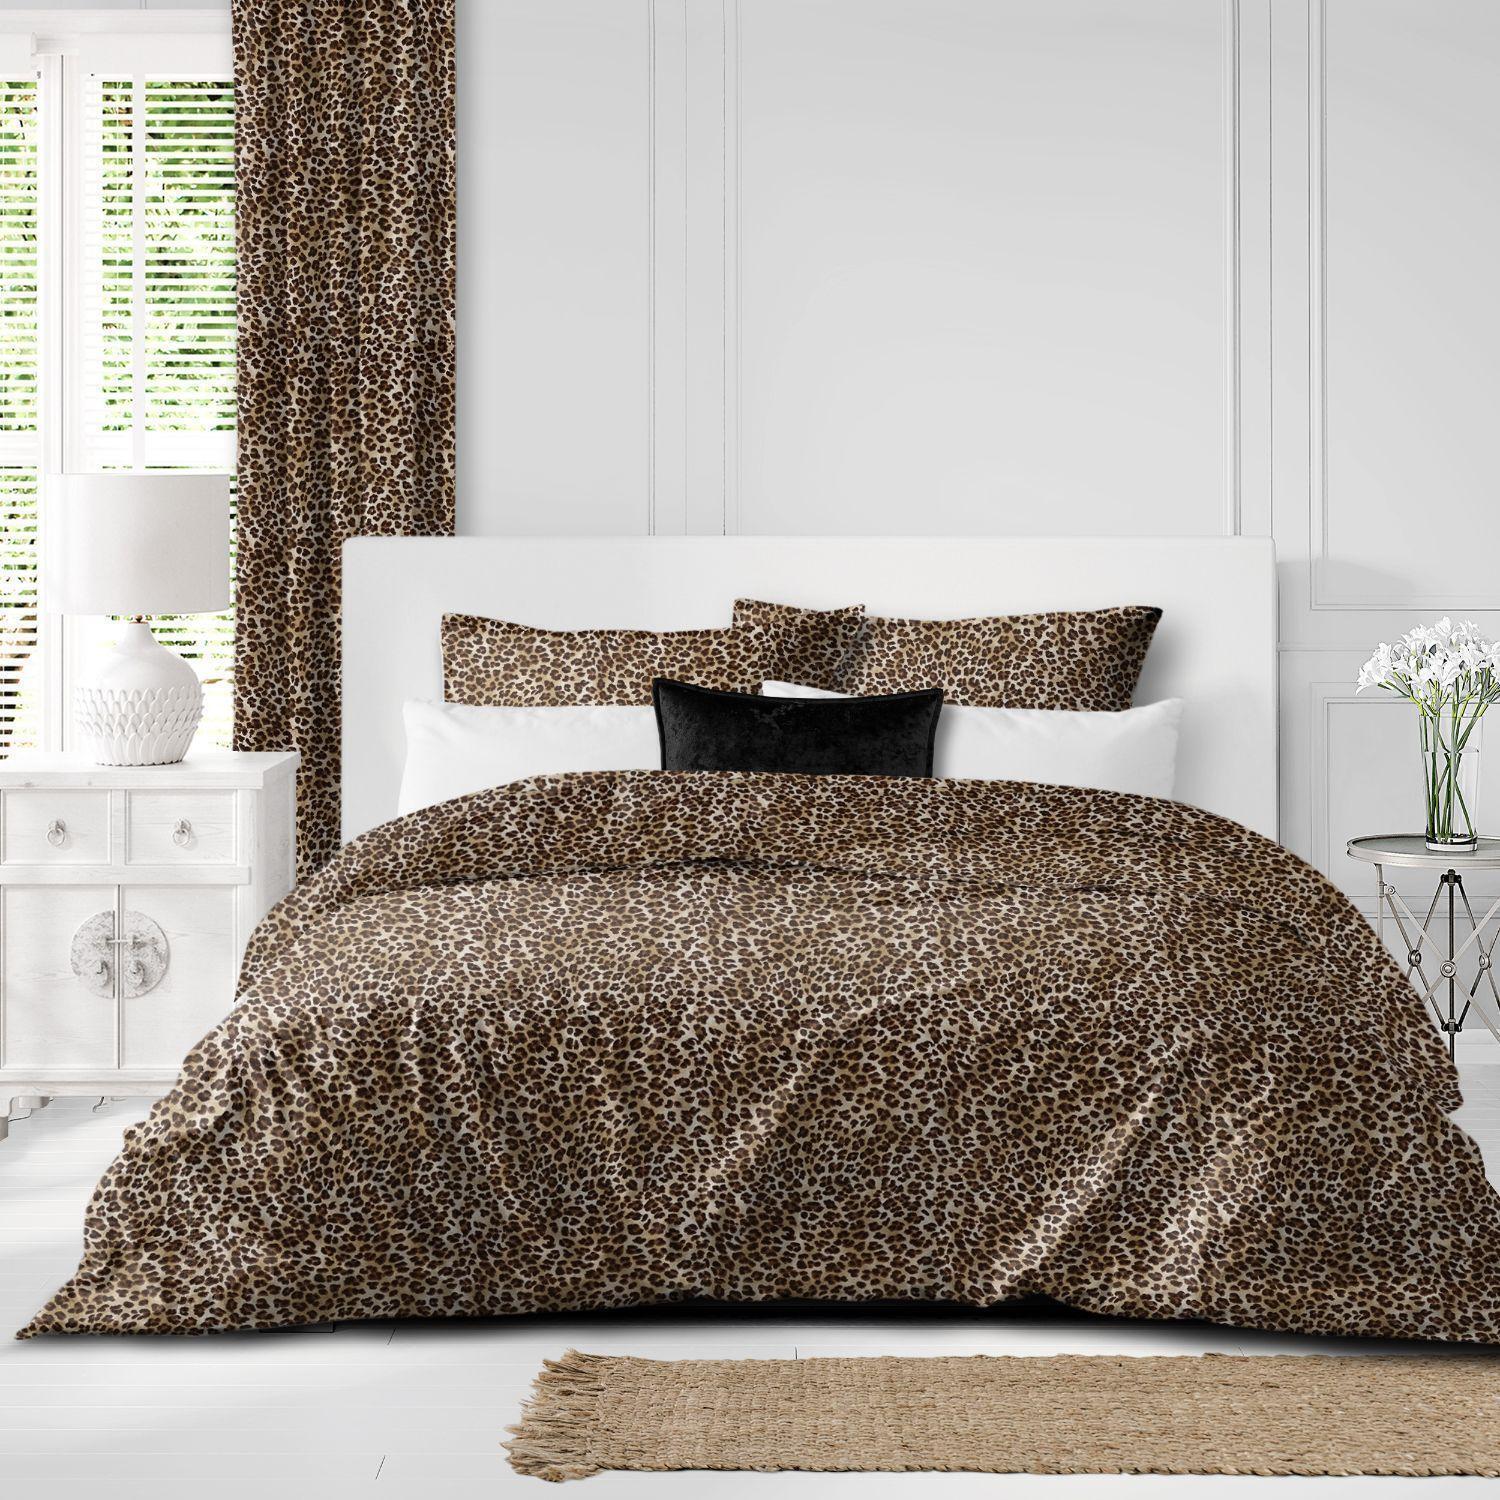 Set of 3 Black and Brown Leopard Print Comforter with Pillow Shams - Queen Size alternate image